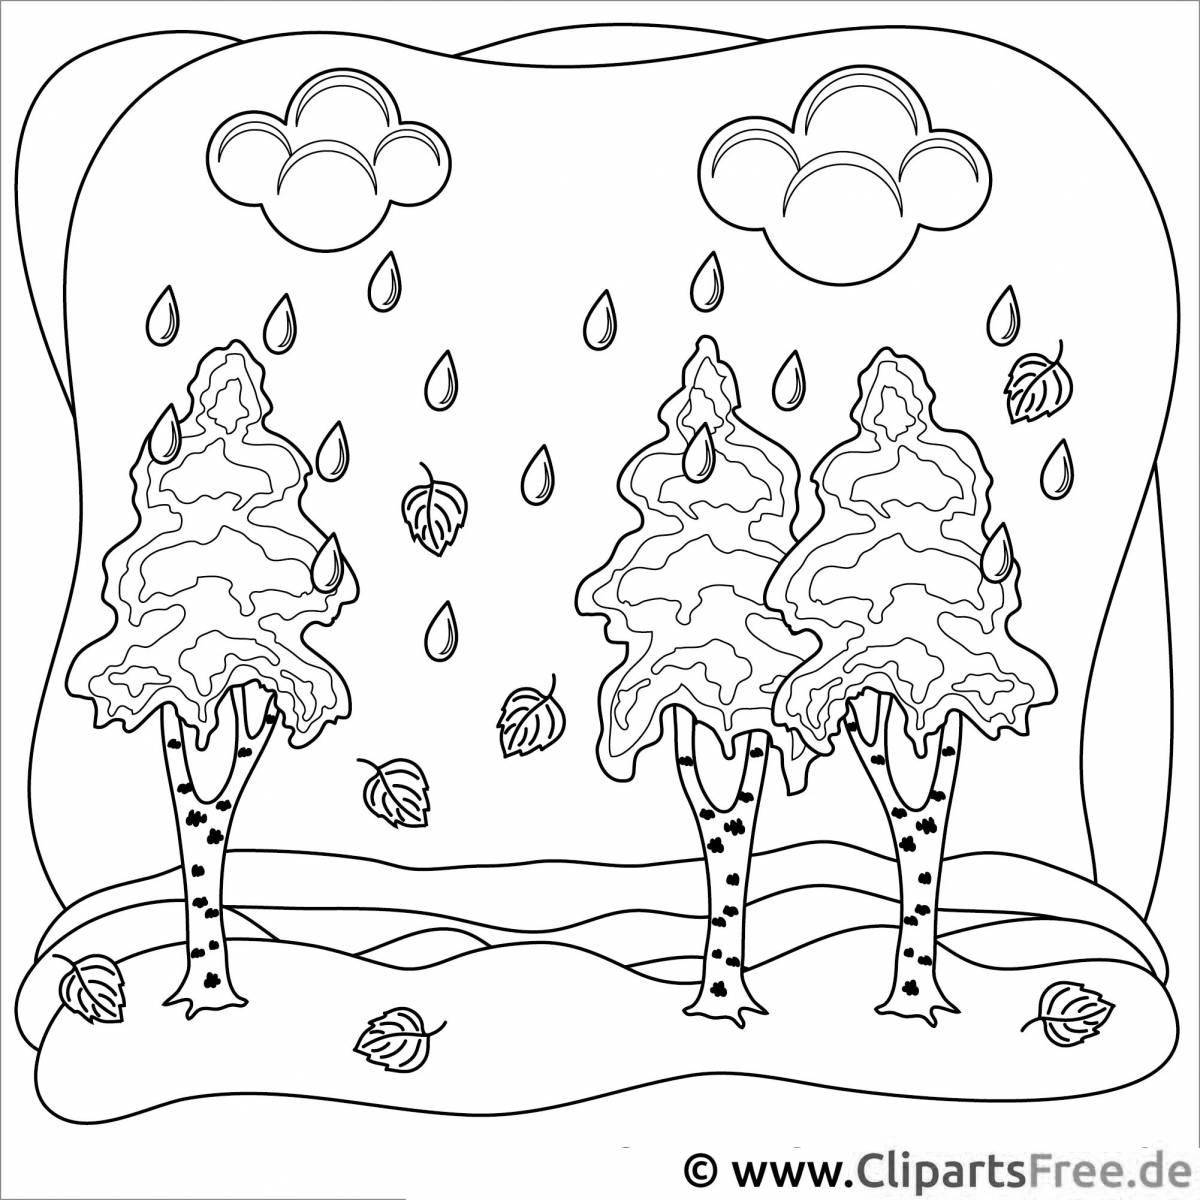 Amazing birch coloring book for kids